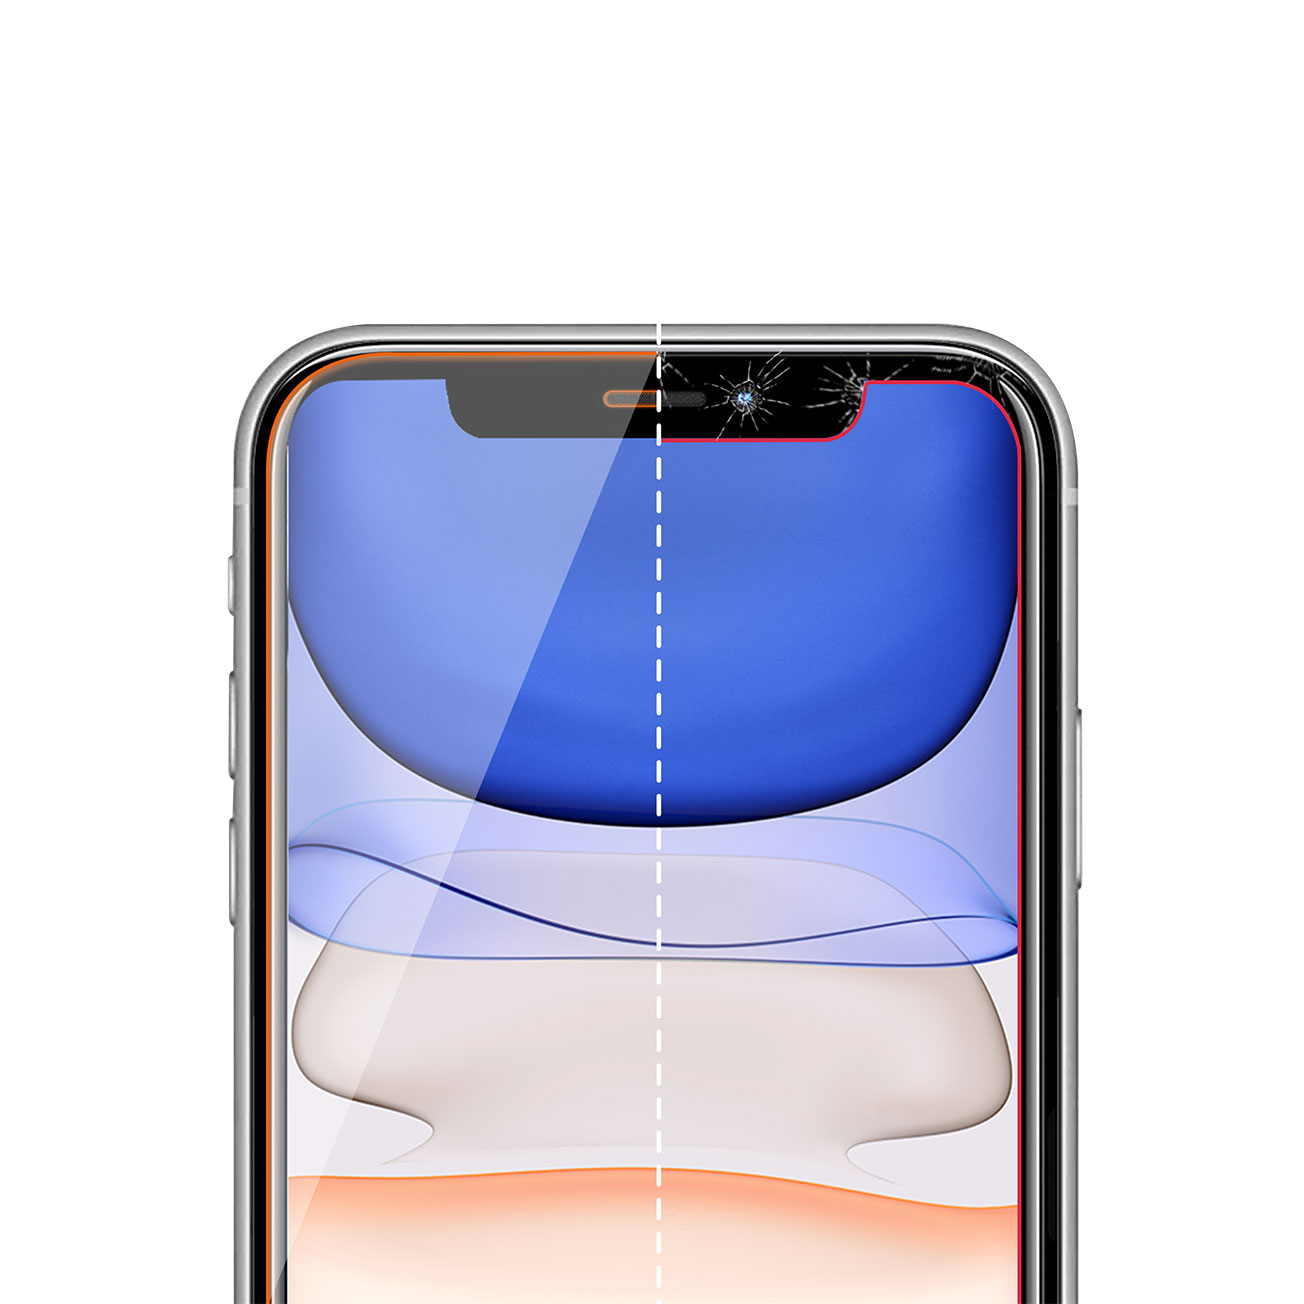 ITSkins Supreme for iPhone XS Max (6.5inch)